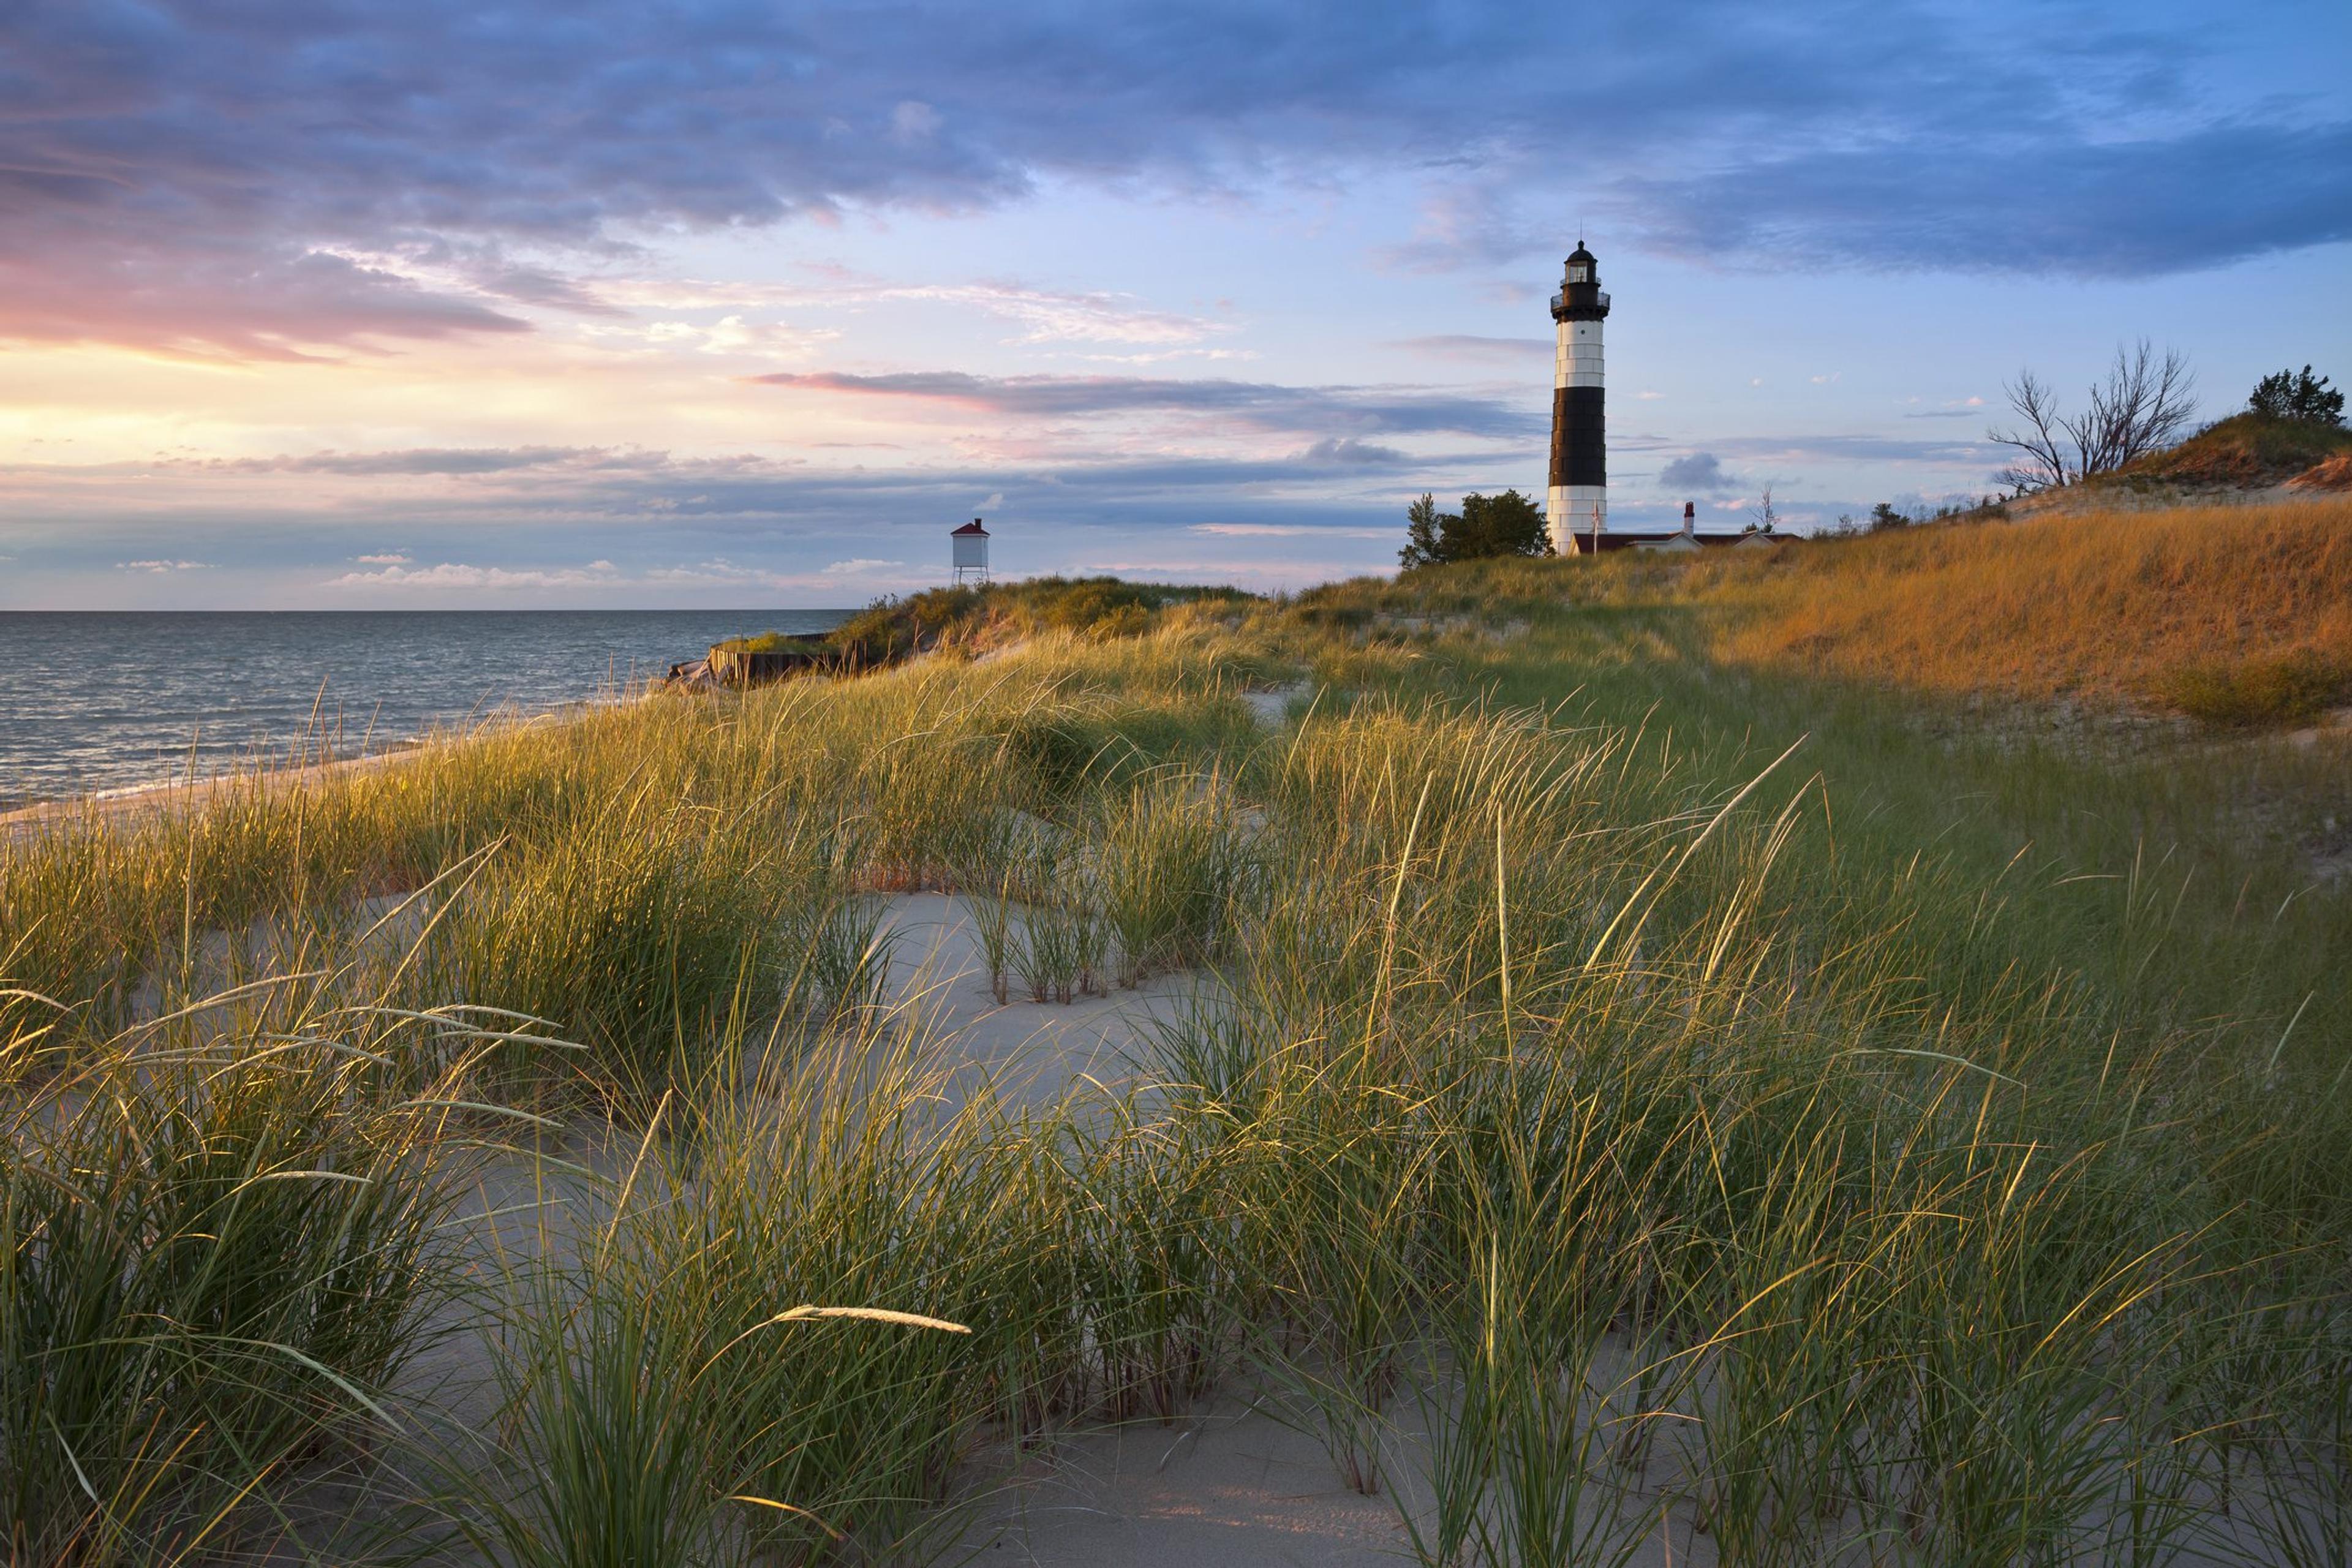 A lighthouse sits in the background of grassy beach as the sun sets.